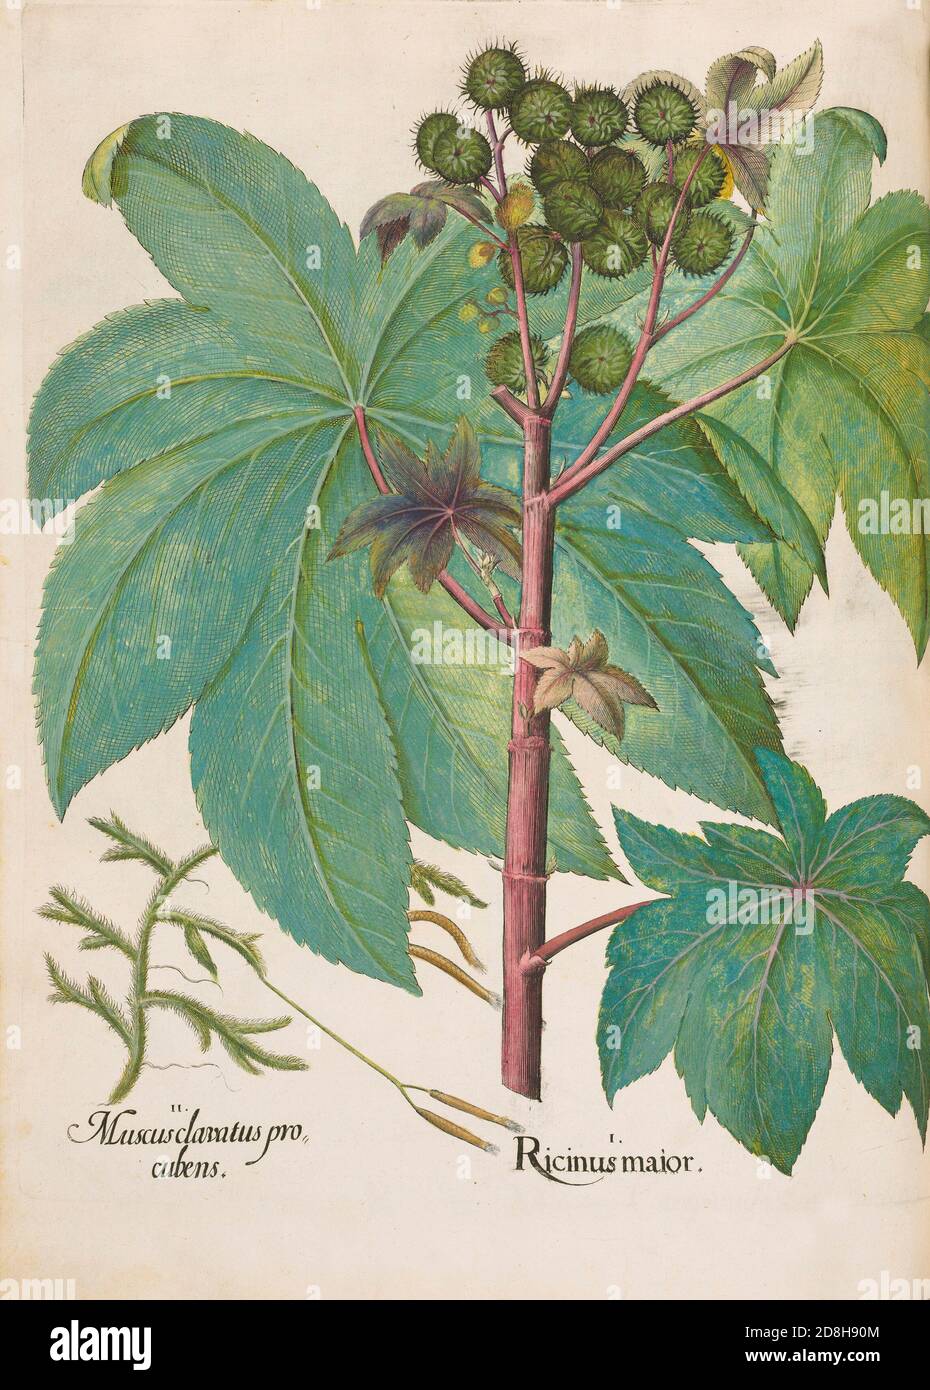 I. Ricinus Maior ; II. Muscusclavatus procubens, botanical illustration by Basil Besler from the The Hortus Eystettensis, a codex produced in 1613. Stock Photo